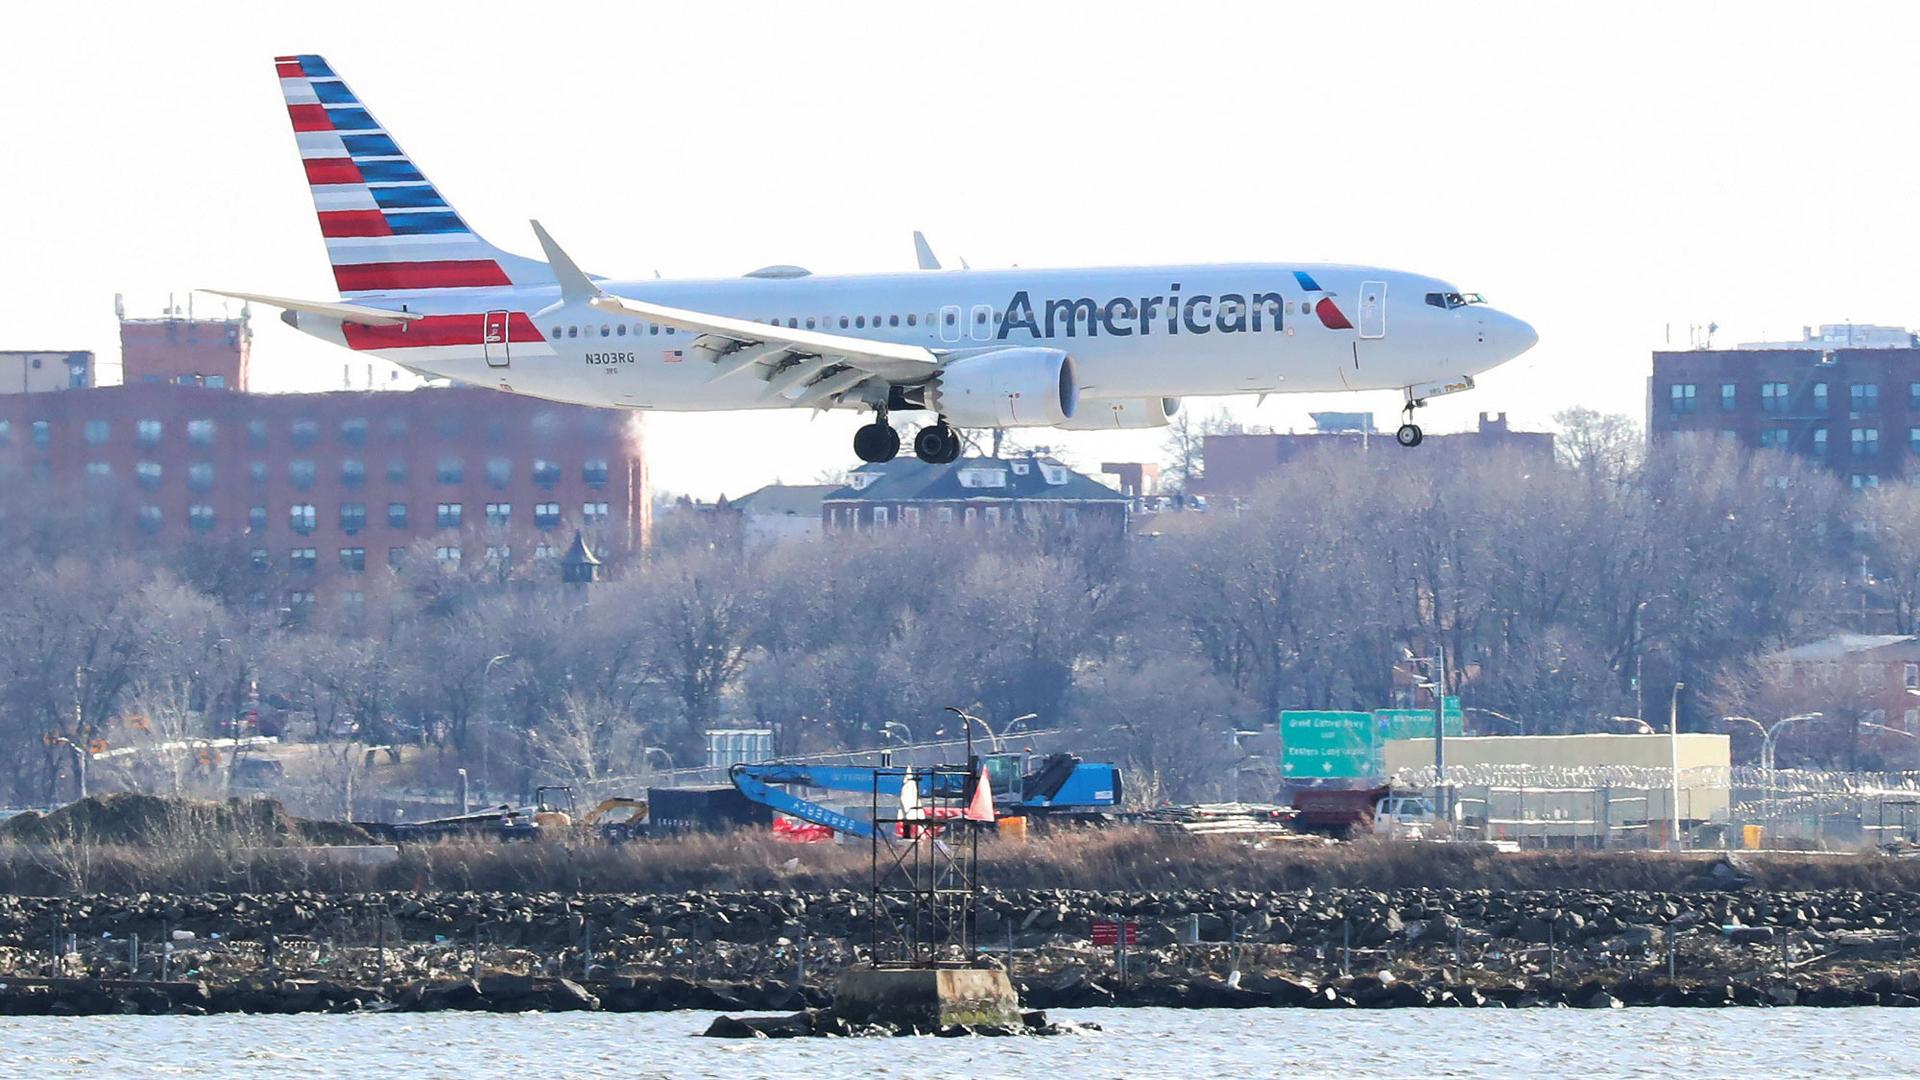 An American Airlines Boeing 737 Max 8 is shown flying from left to right in the photograph with several buildings in the background.